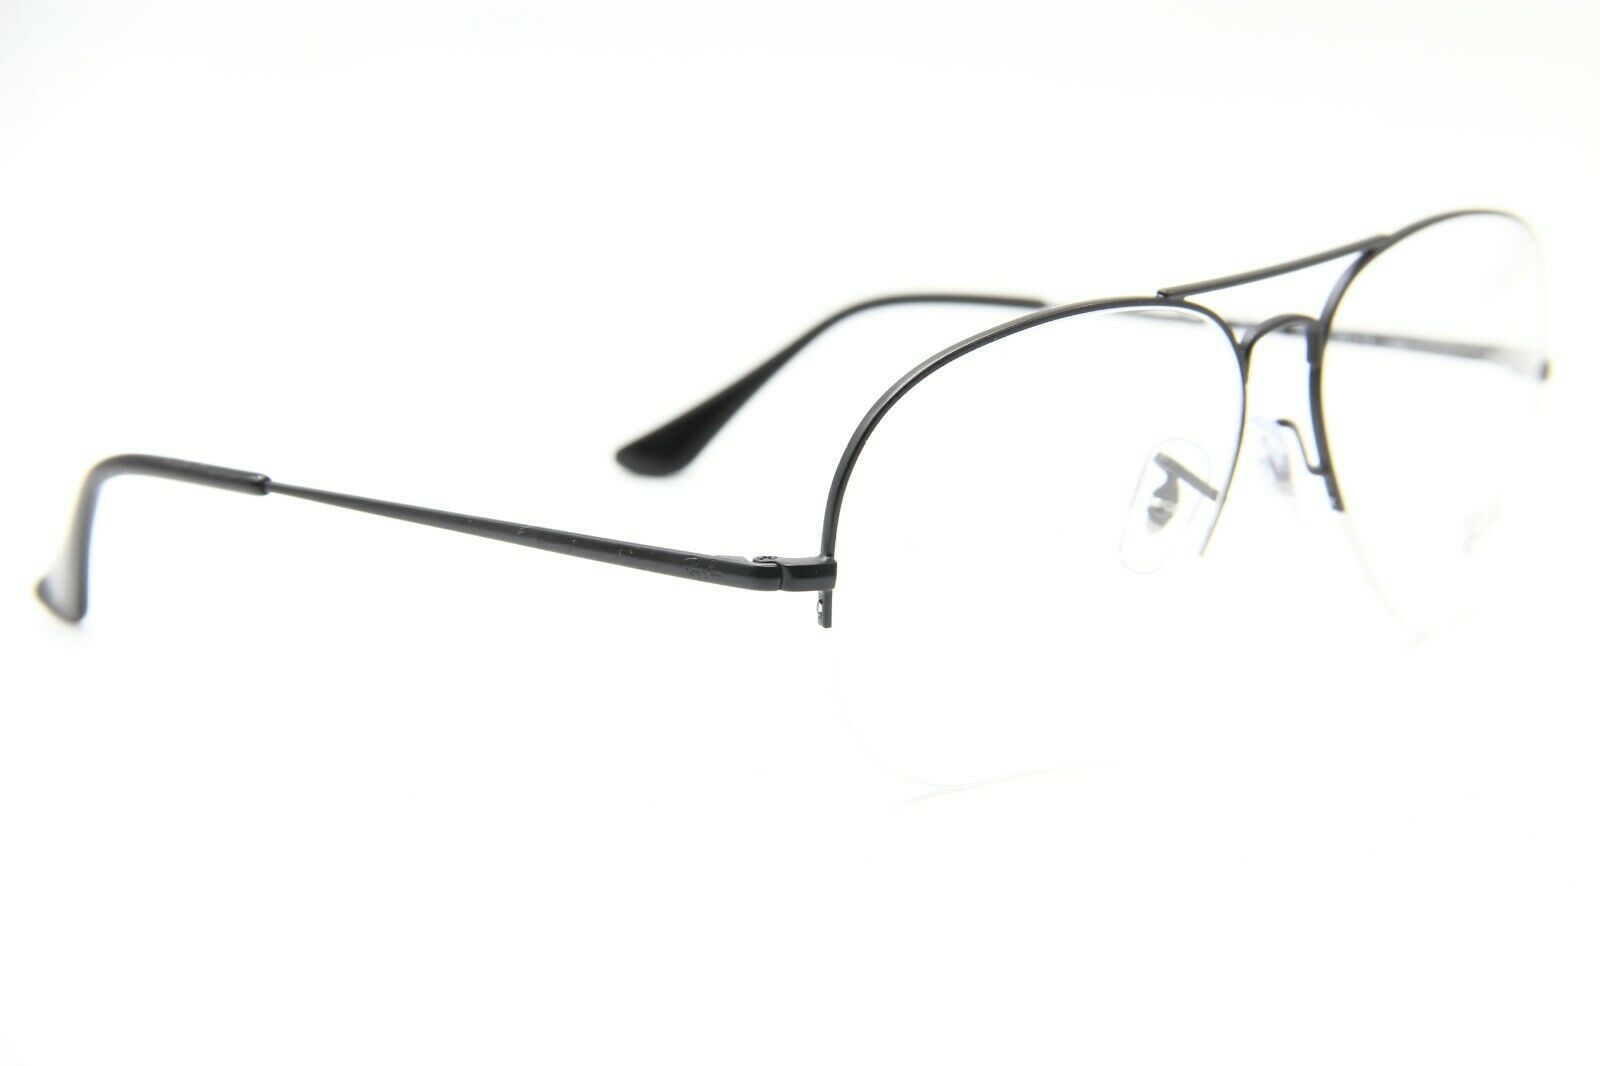 NEW RAY-BAN RB 6589 2503 BLACK EYEGLASSES AUTHENTIC FRAME RX RB6589 59 ...